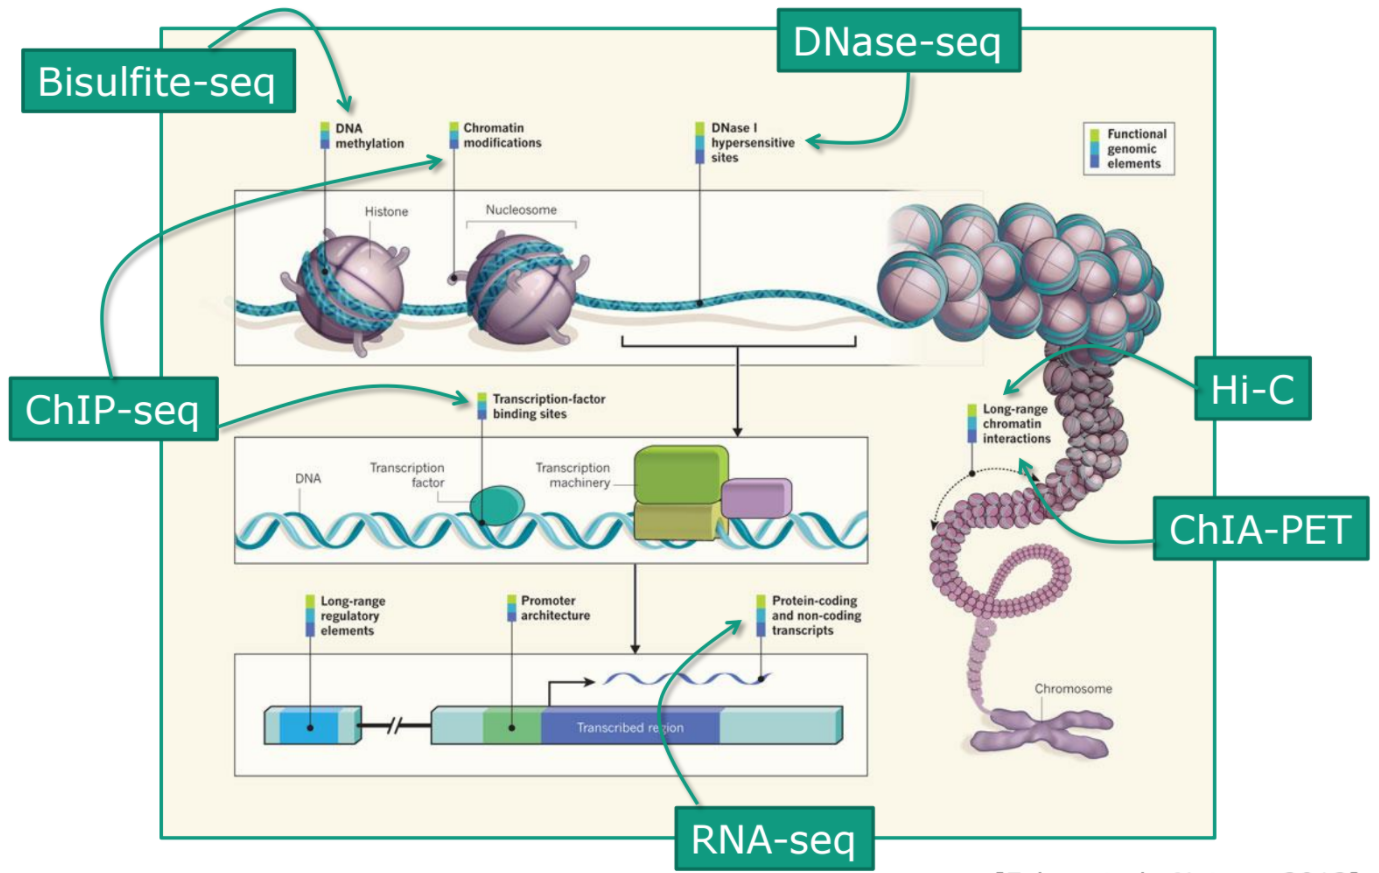 Cartoon of different types of sequencing and where they appear in the genome. Bisulfite and ChIP-Seq have arrows pointing to nucleosomes. DNaseq-seq points to the region between nucleosomes. Hi-C and ChIA-PET point to the long range chromatin interactions. RNA-Seq points to a subset of the genome showing a promoter and transcribed region.